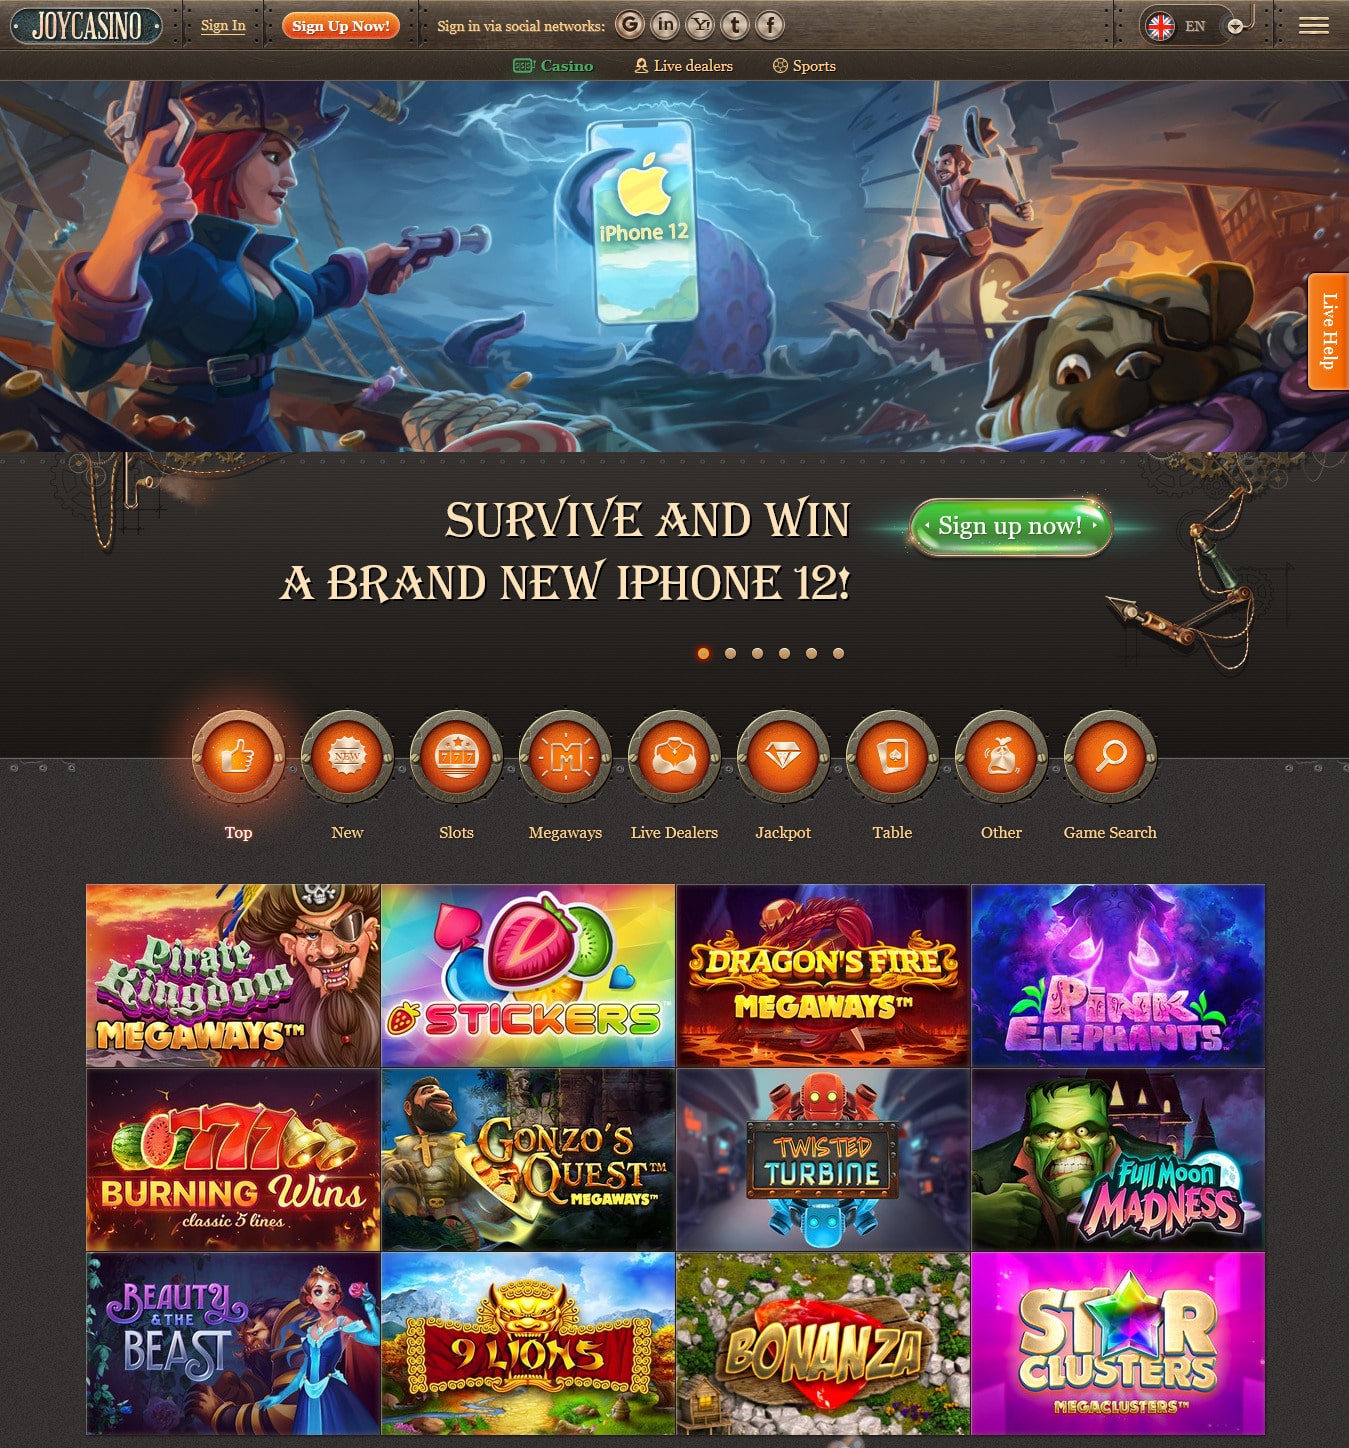 The real experience of playing at JoyCasino with 200% bonus